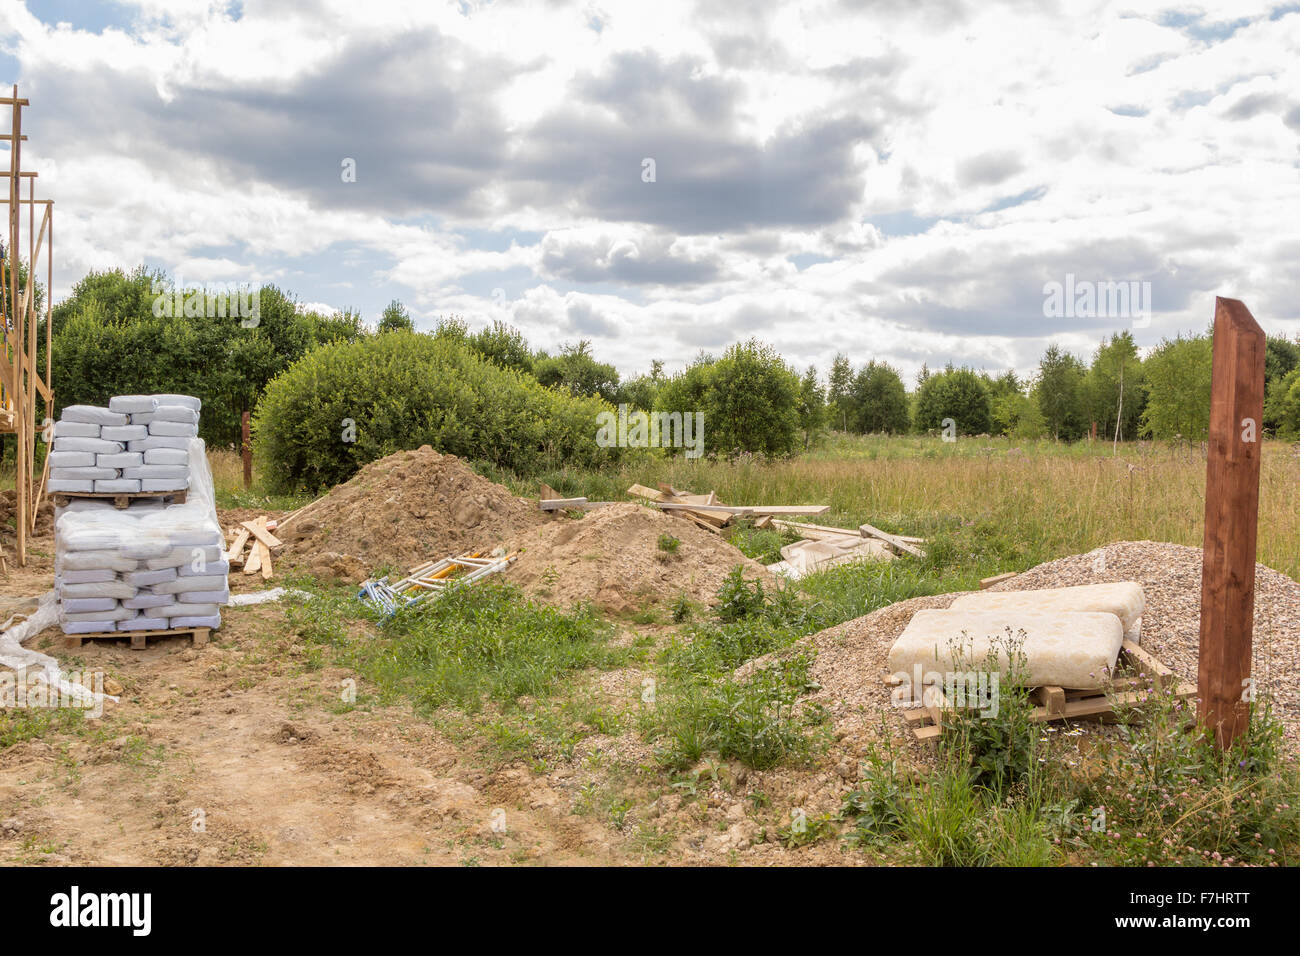 construction material and debris in a field Stock Photo